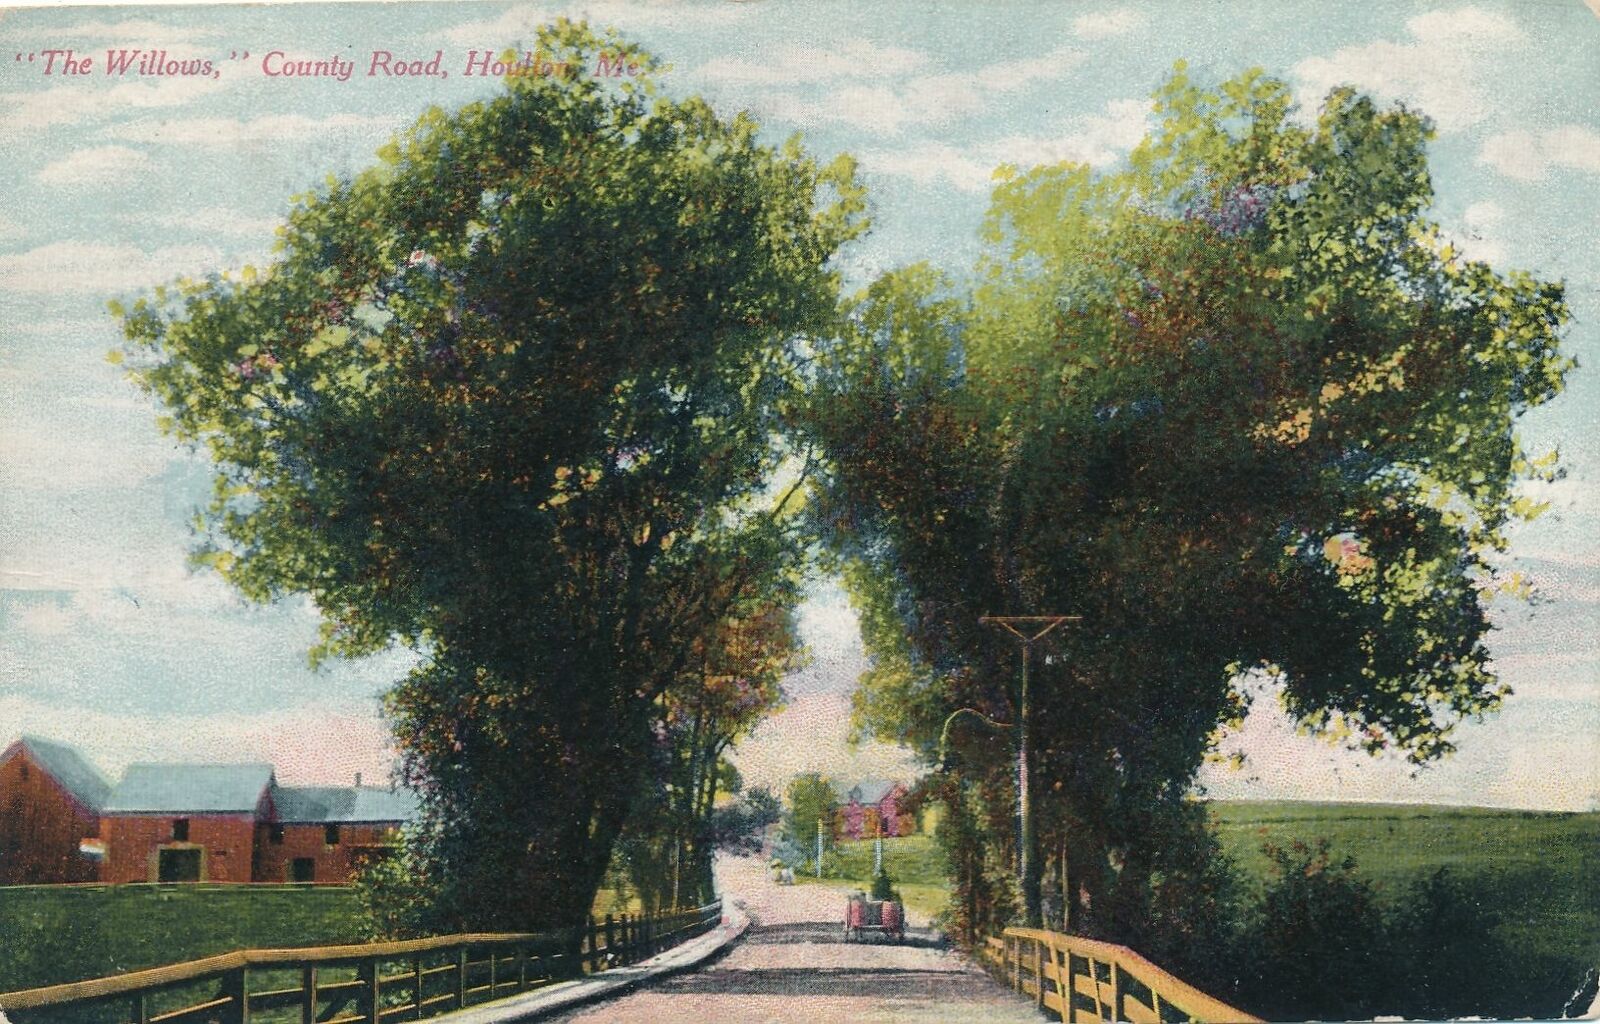 HOULTON ME - The Willows County Road - 1910